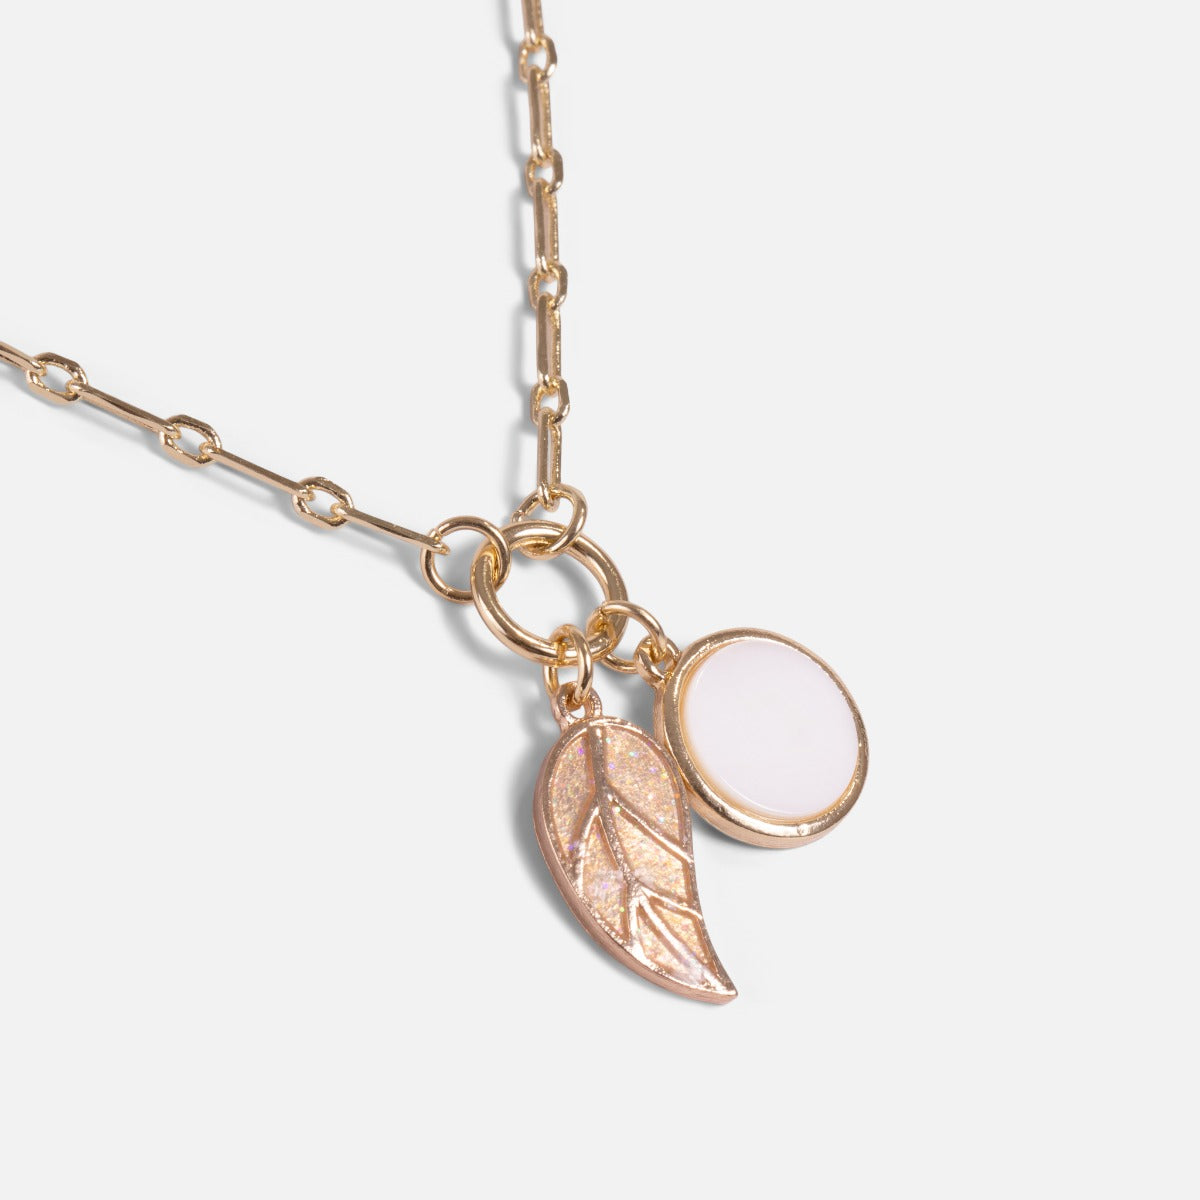 Golden pendant with leaf and circle charms